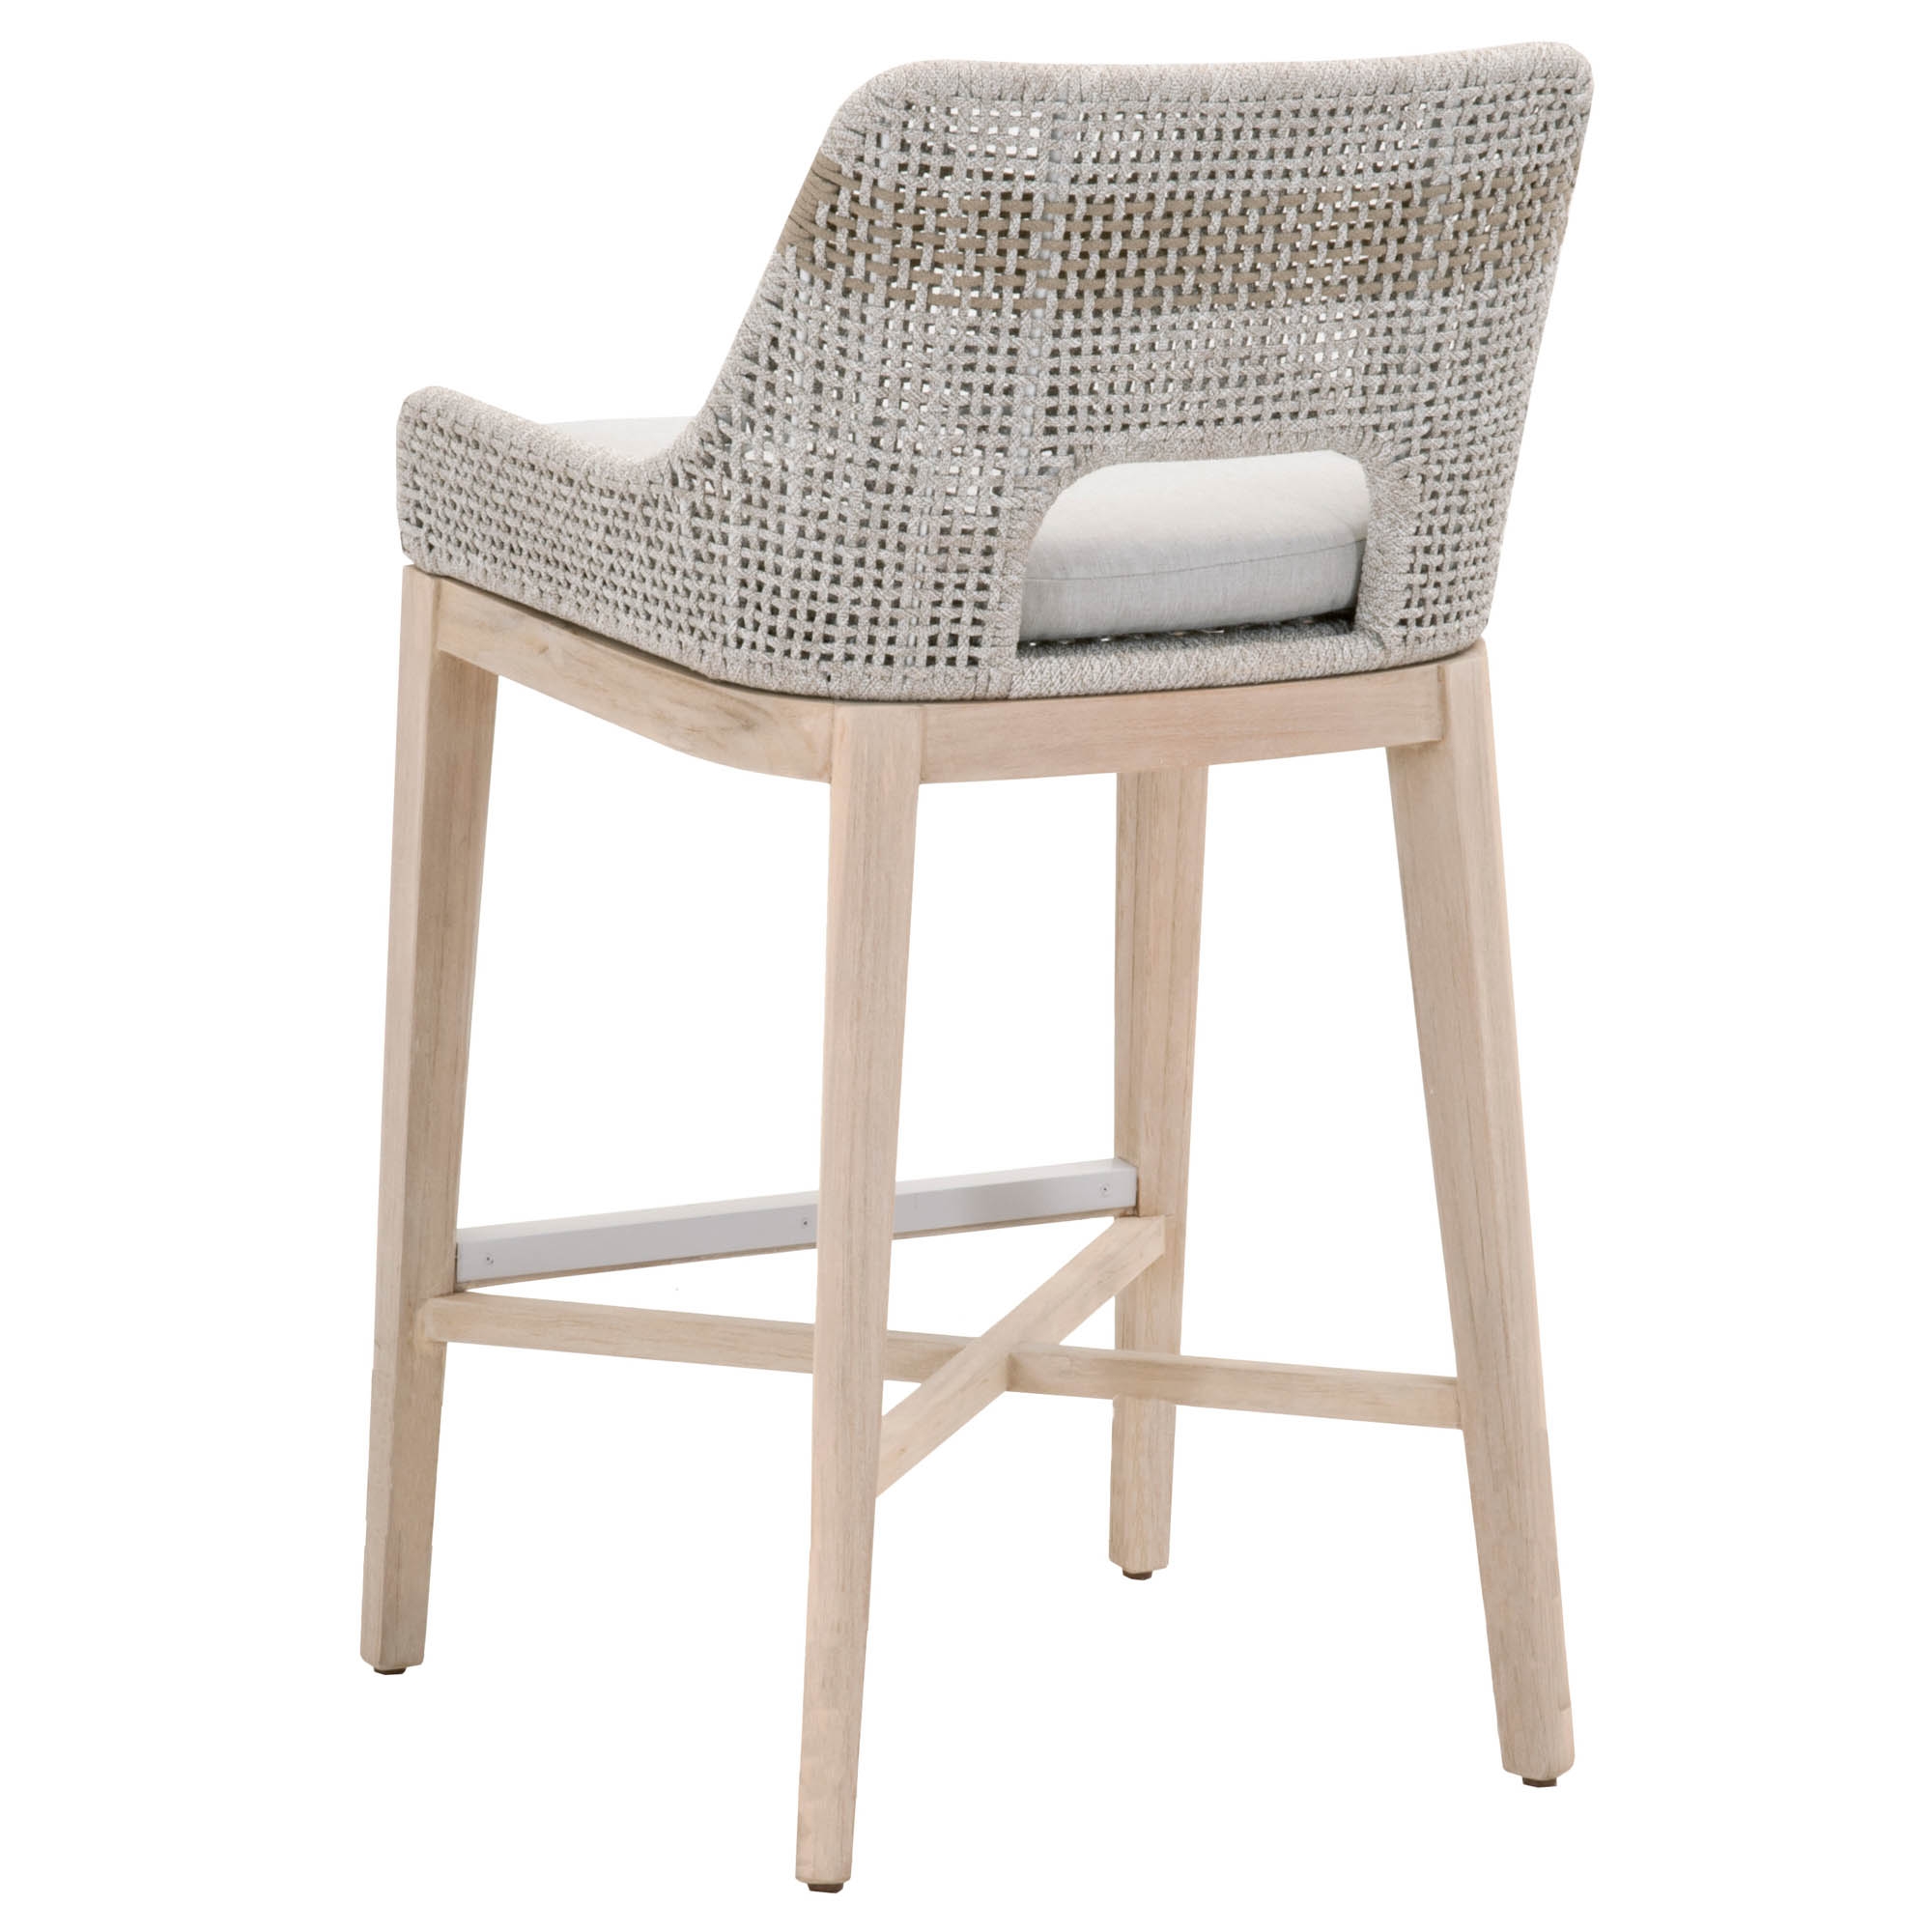 Tapestry Outdoor Barstool, Gray - Image 4